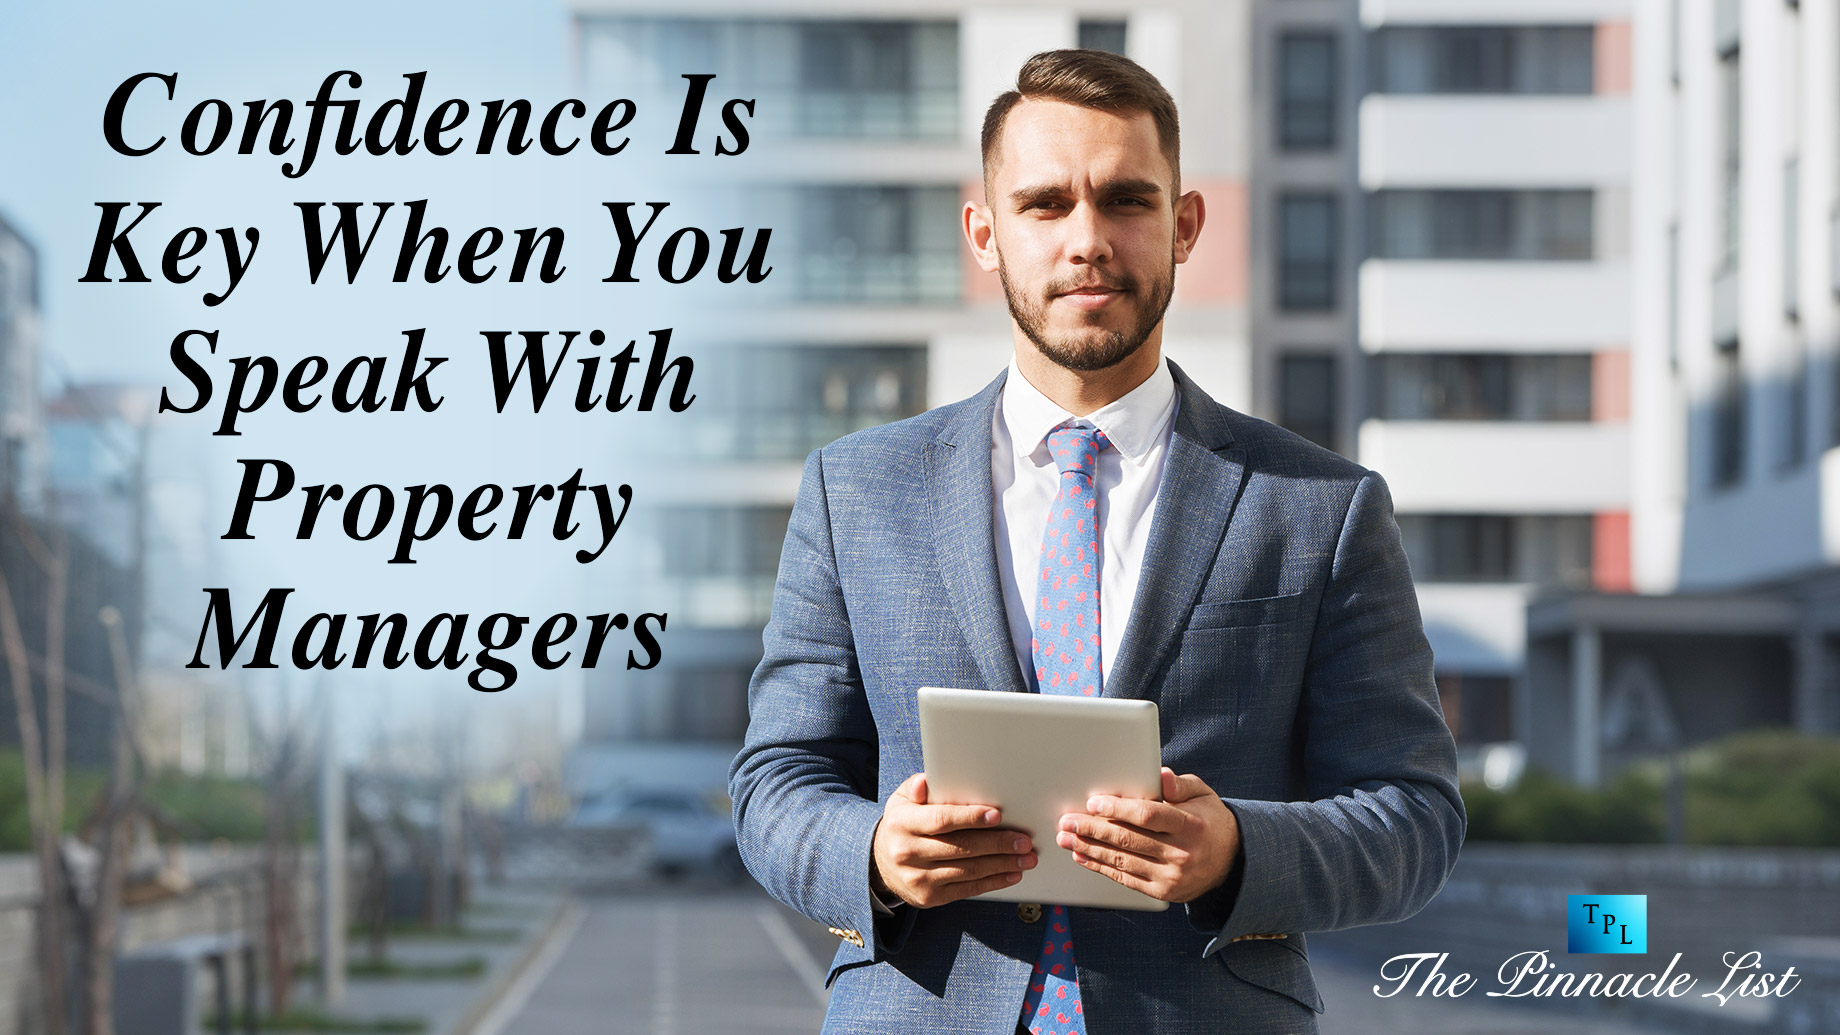 Confidence Is Key When You Speak With Property Managers